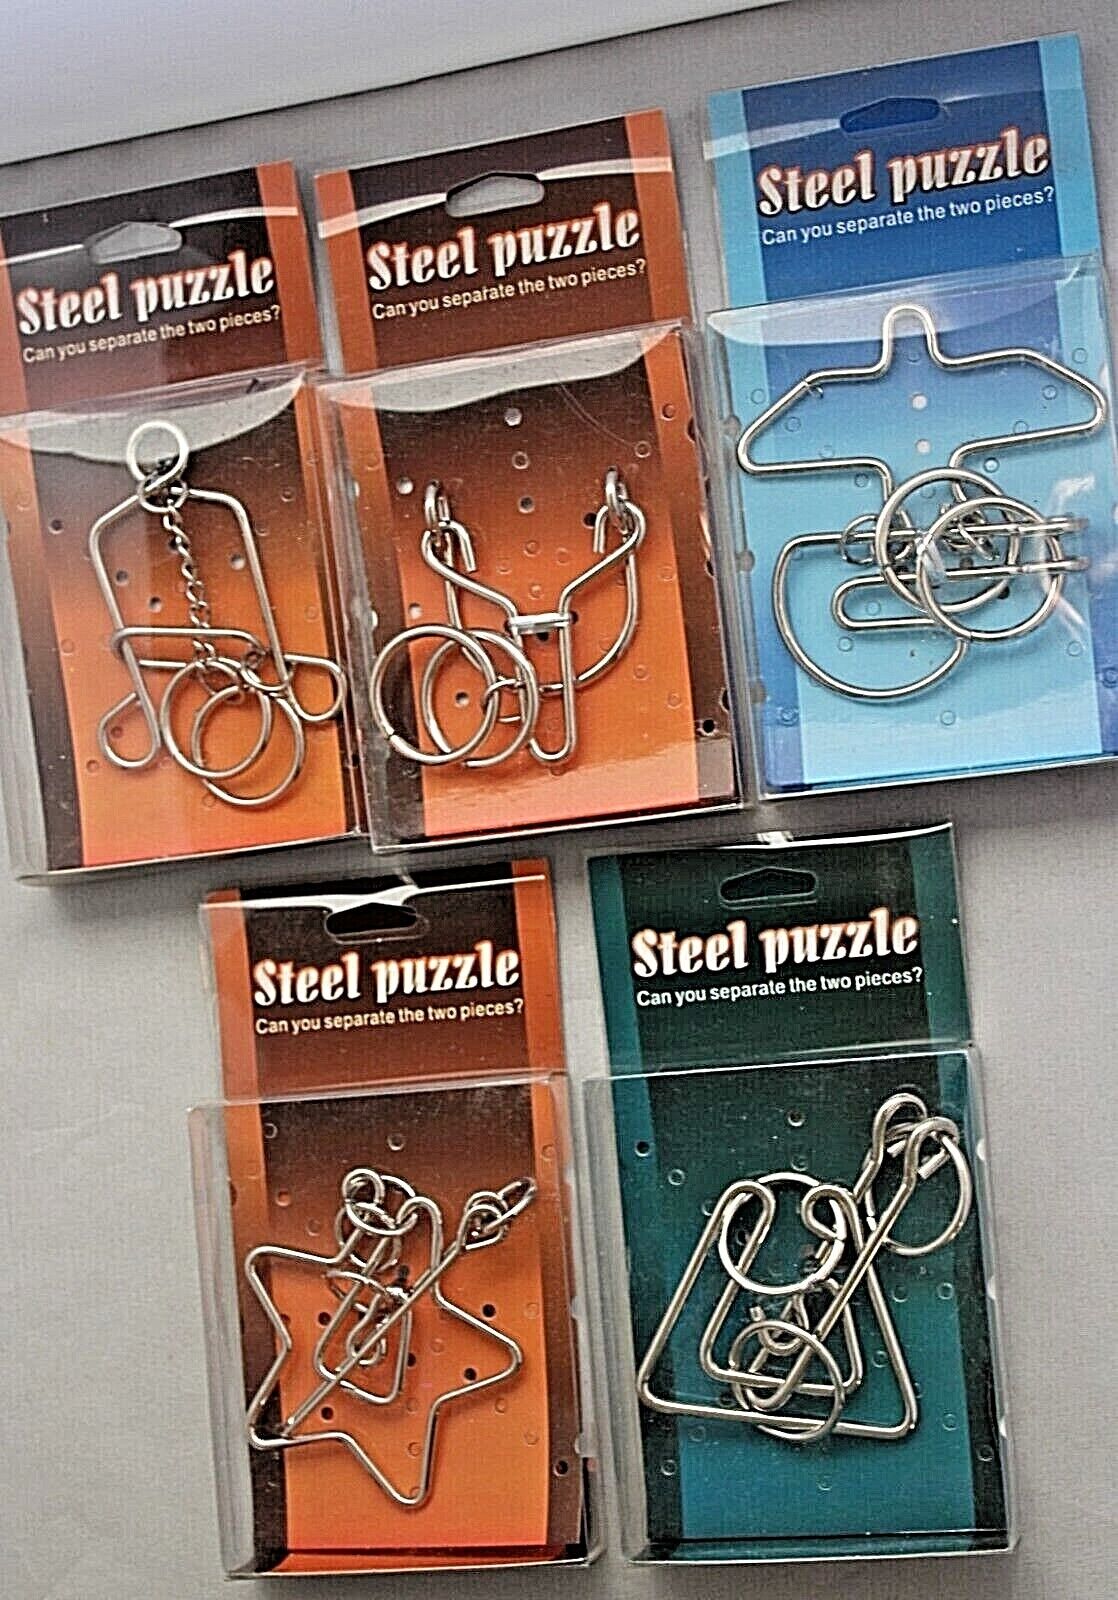 5 Different Steel Puzzles Zkuochuang Toy